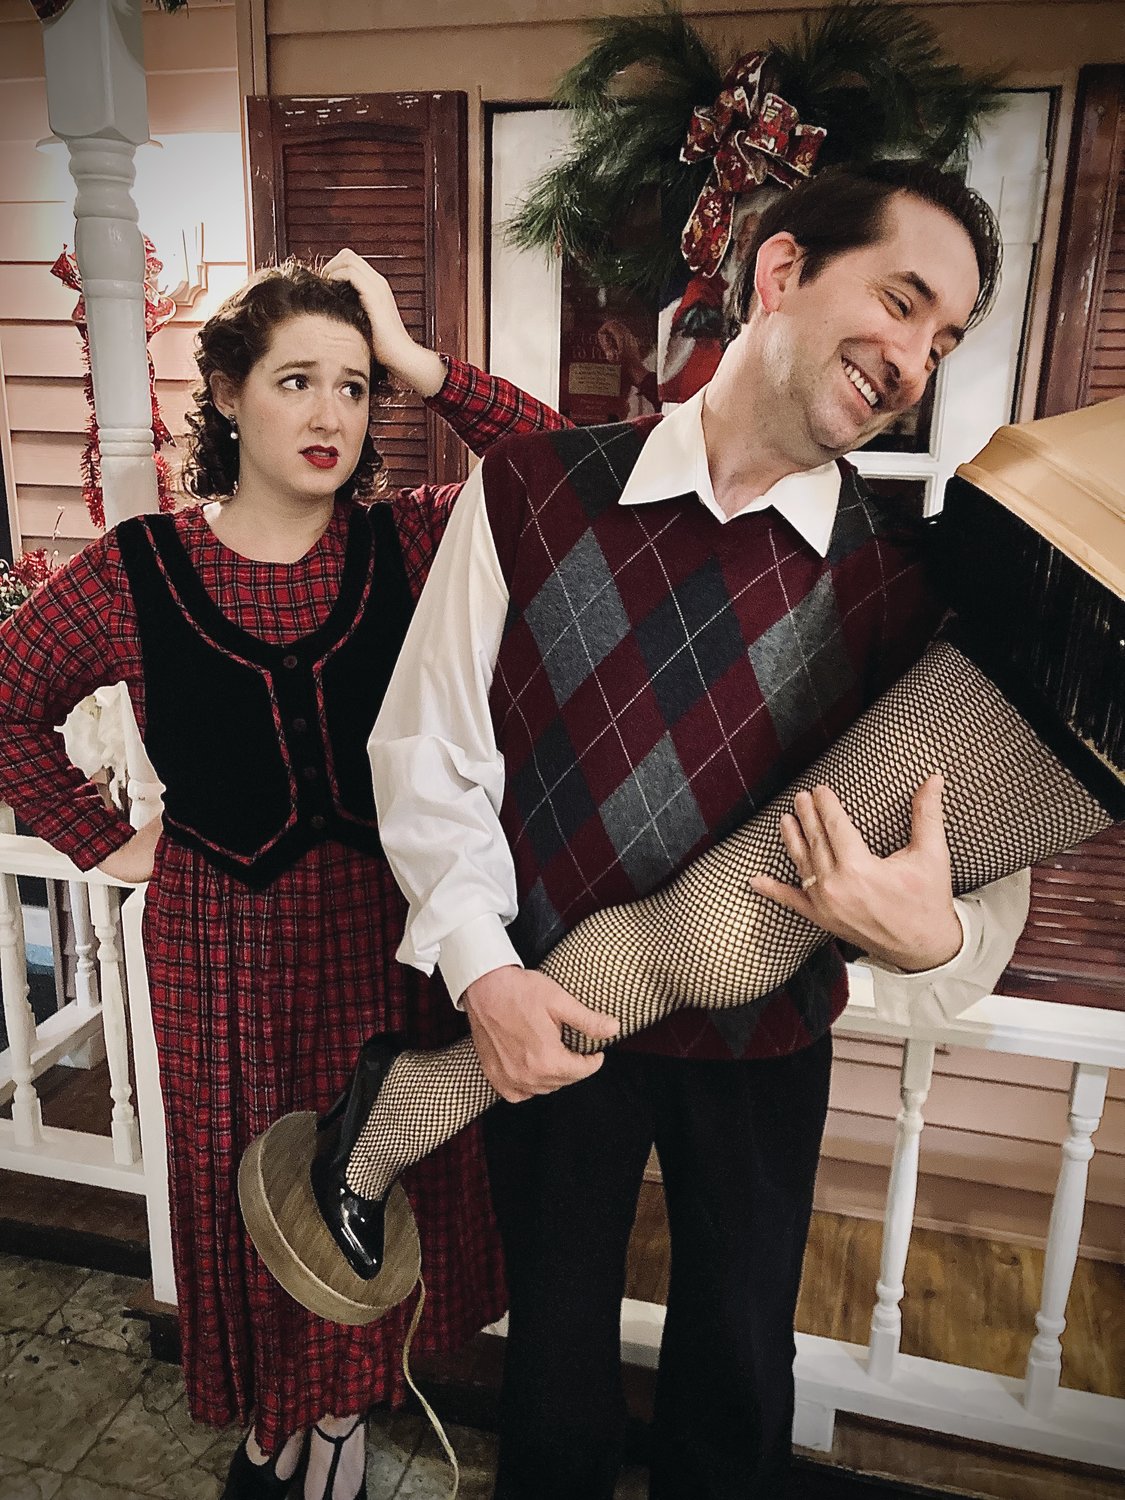 The Parkers (Samantha Bagdon and Thomas J. Besler) discuss the infamous Leg Lamp, in one of the iconic scenes of A Christmas Story: The Musical. This fan-favorite runs from Nov. 19 through Dec. 19 at Myers Dinner Theatre in Hillsboro.